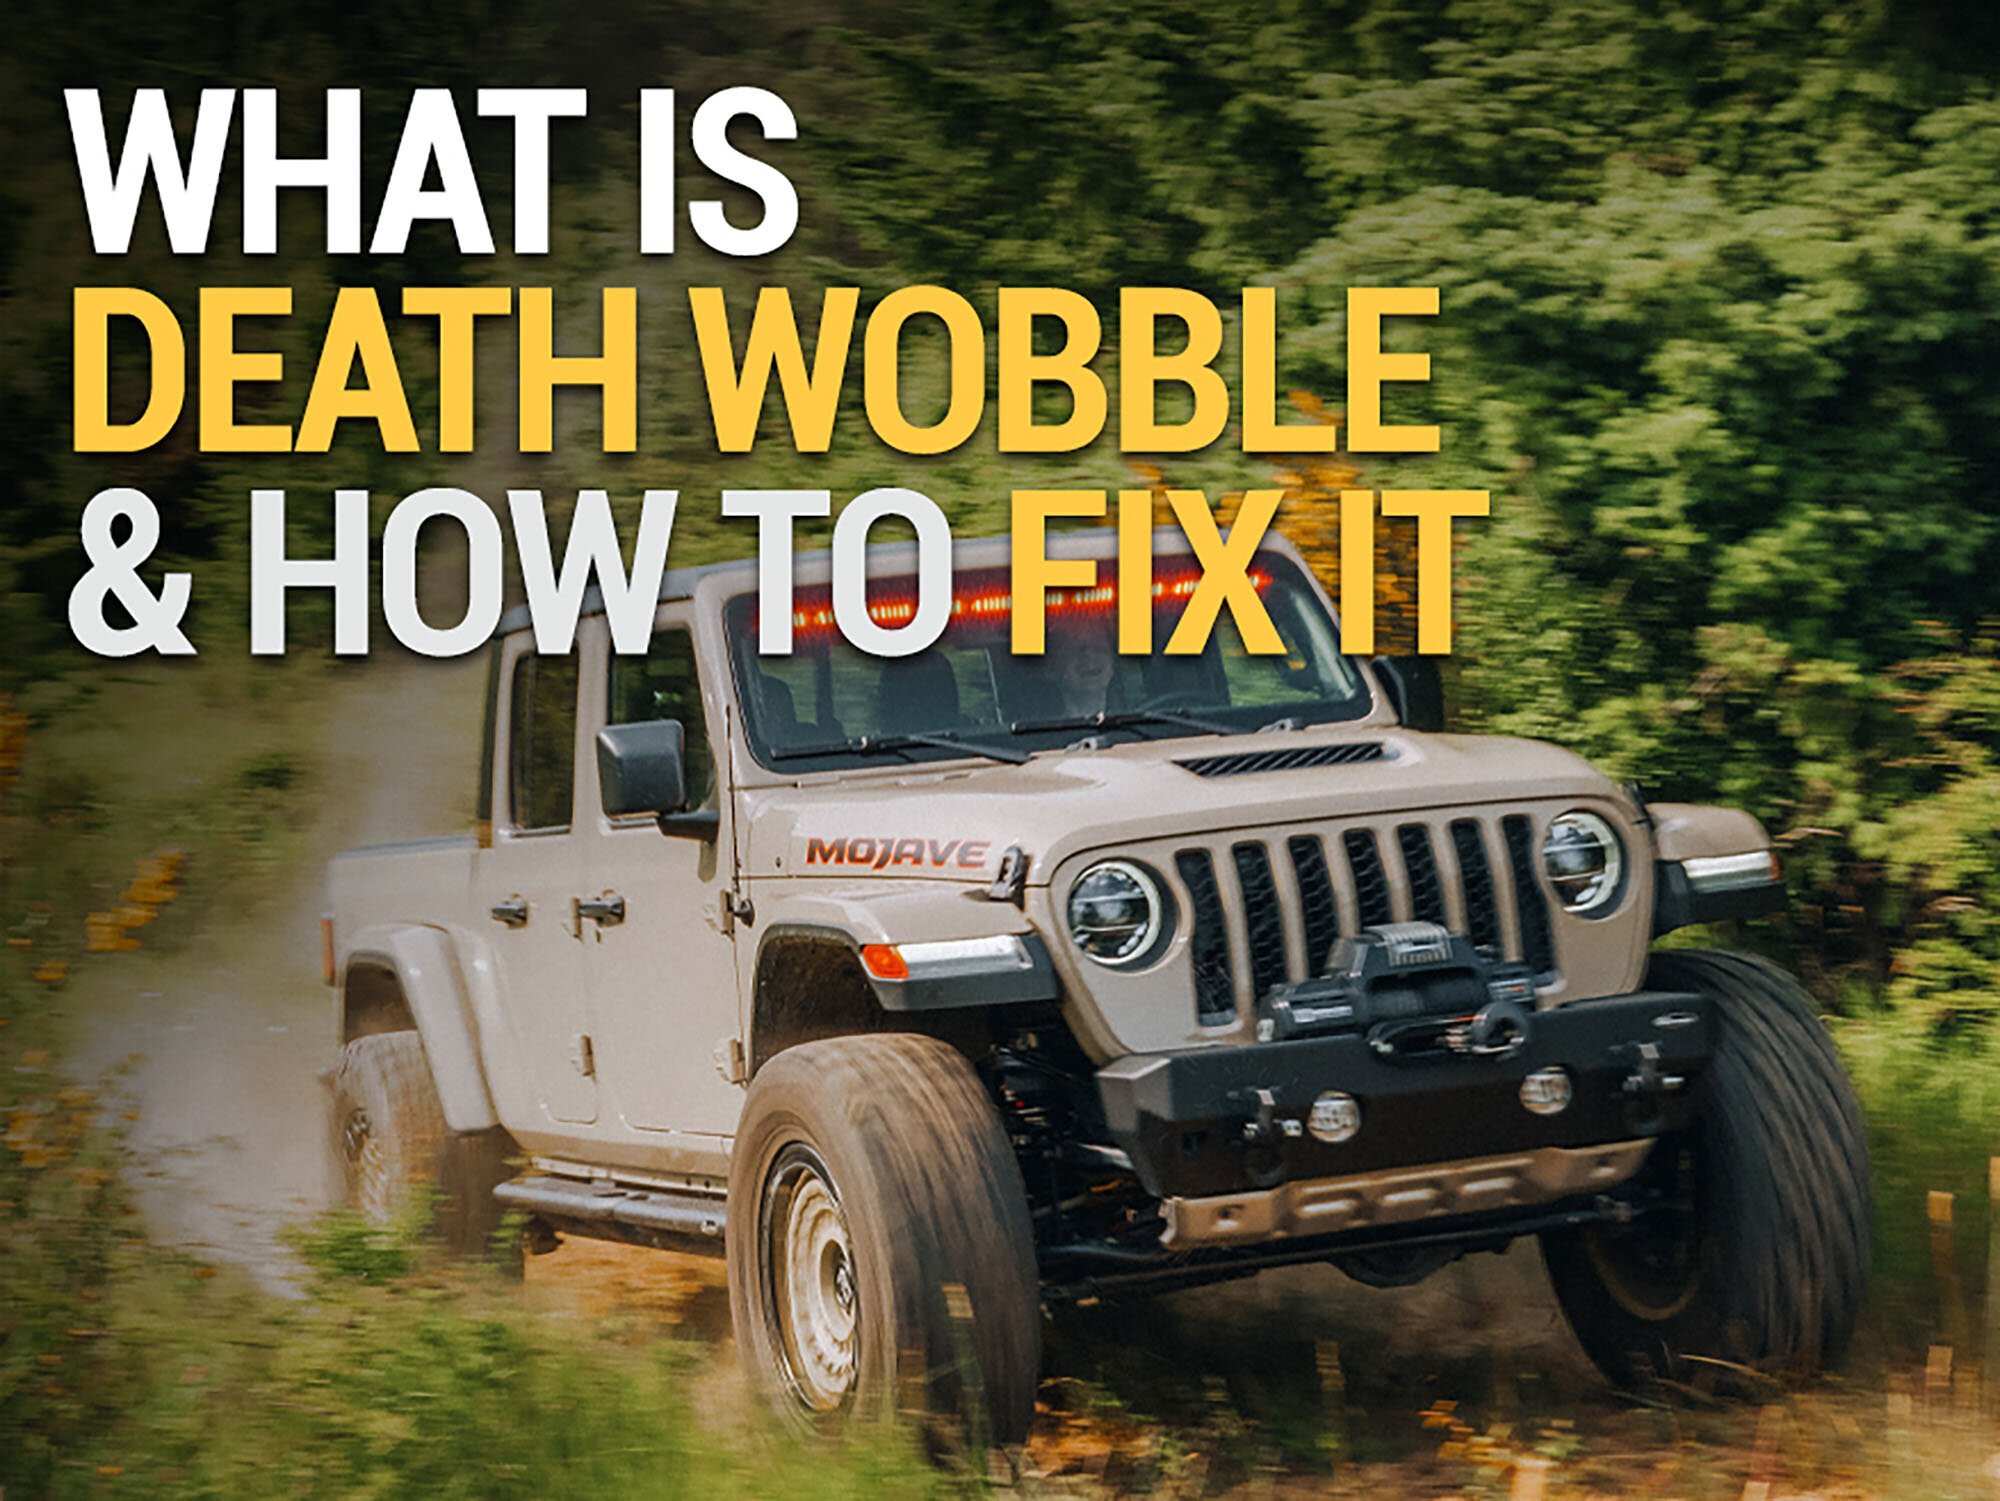 How do you deal with the wobbles?